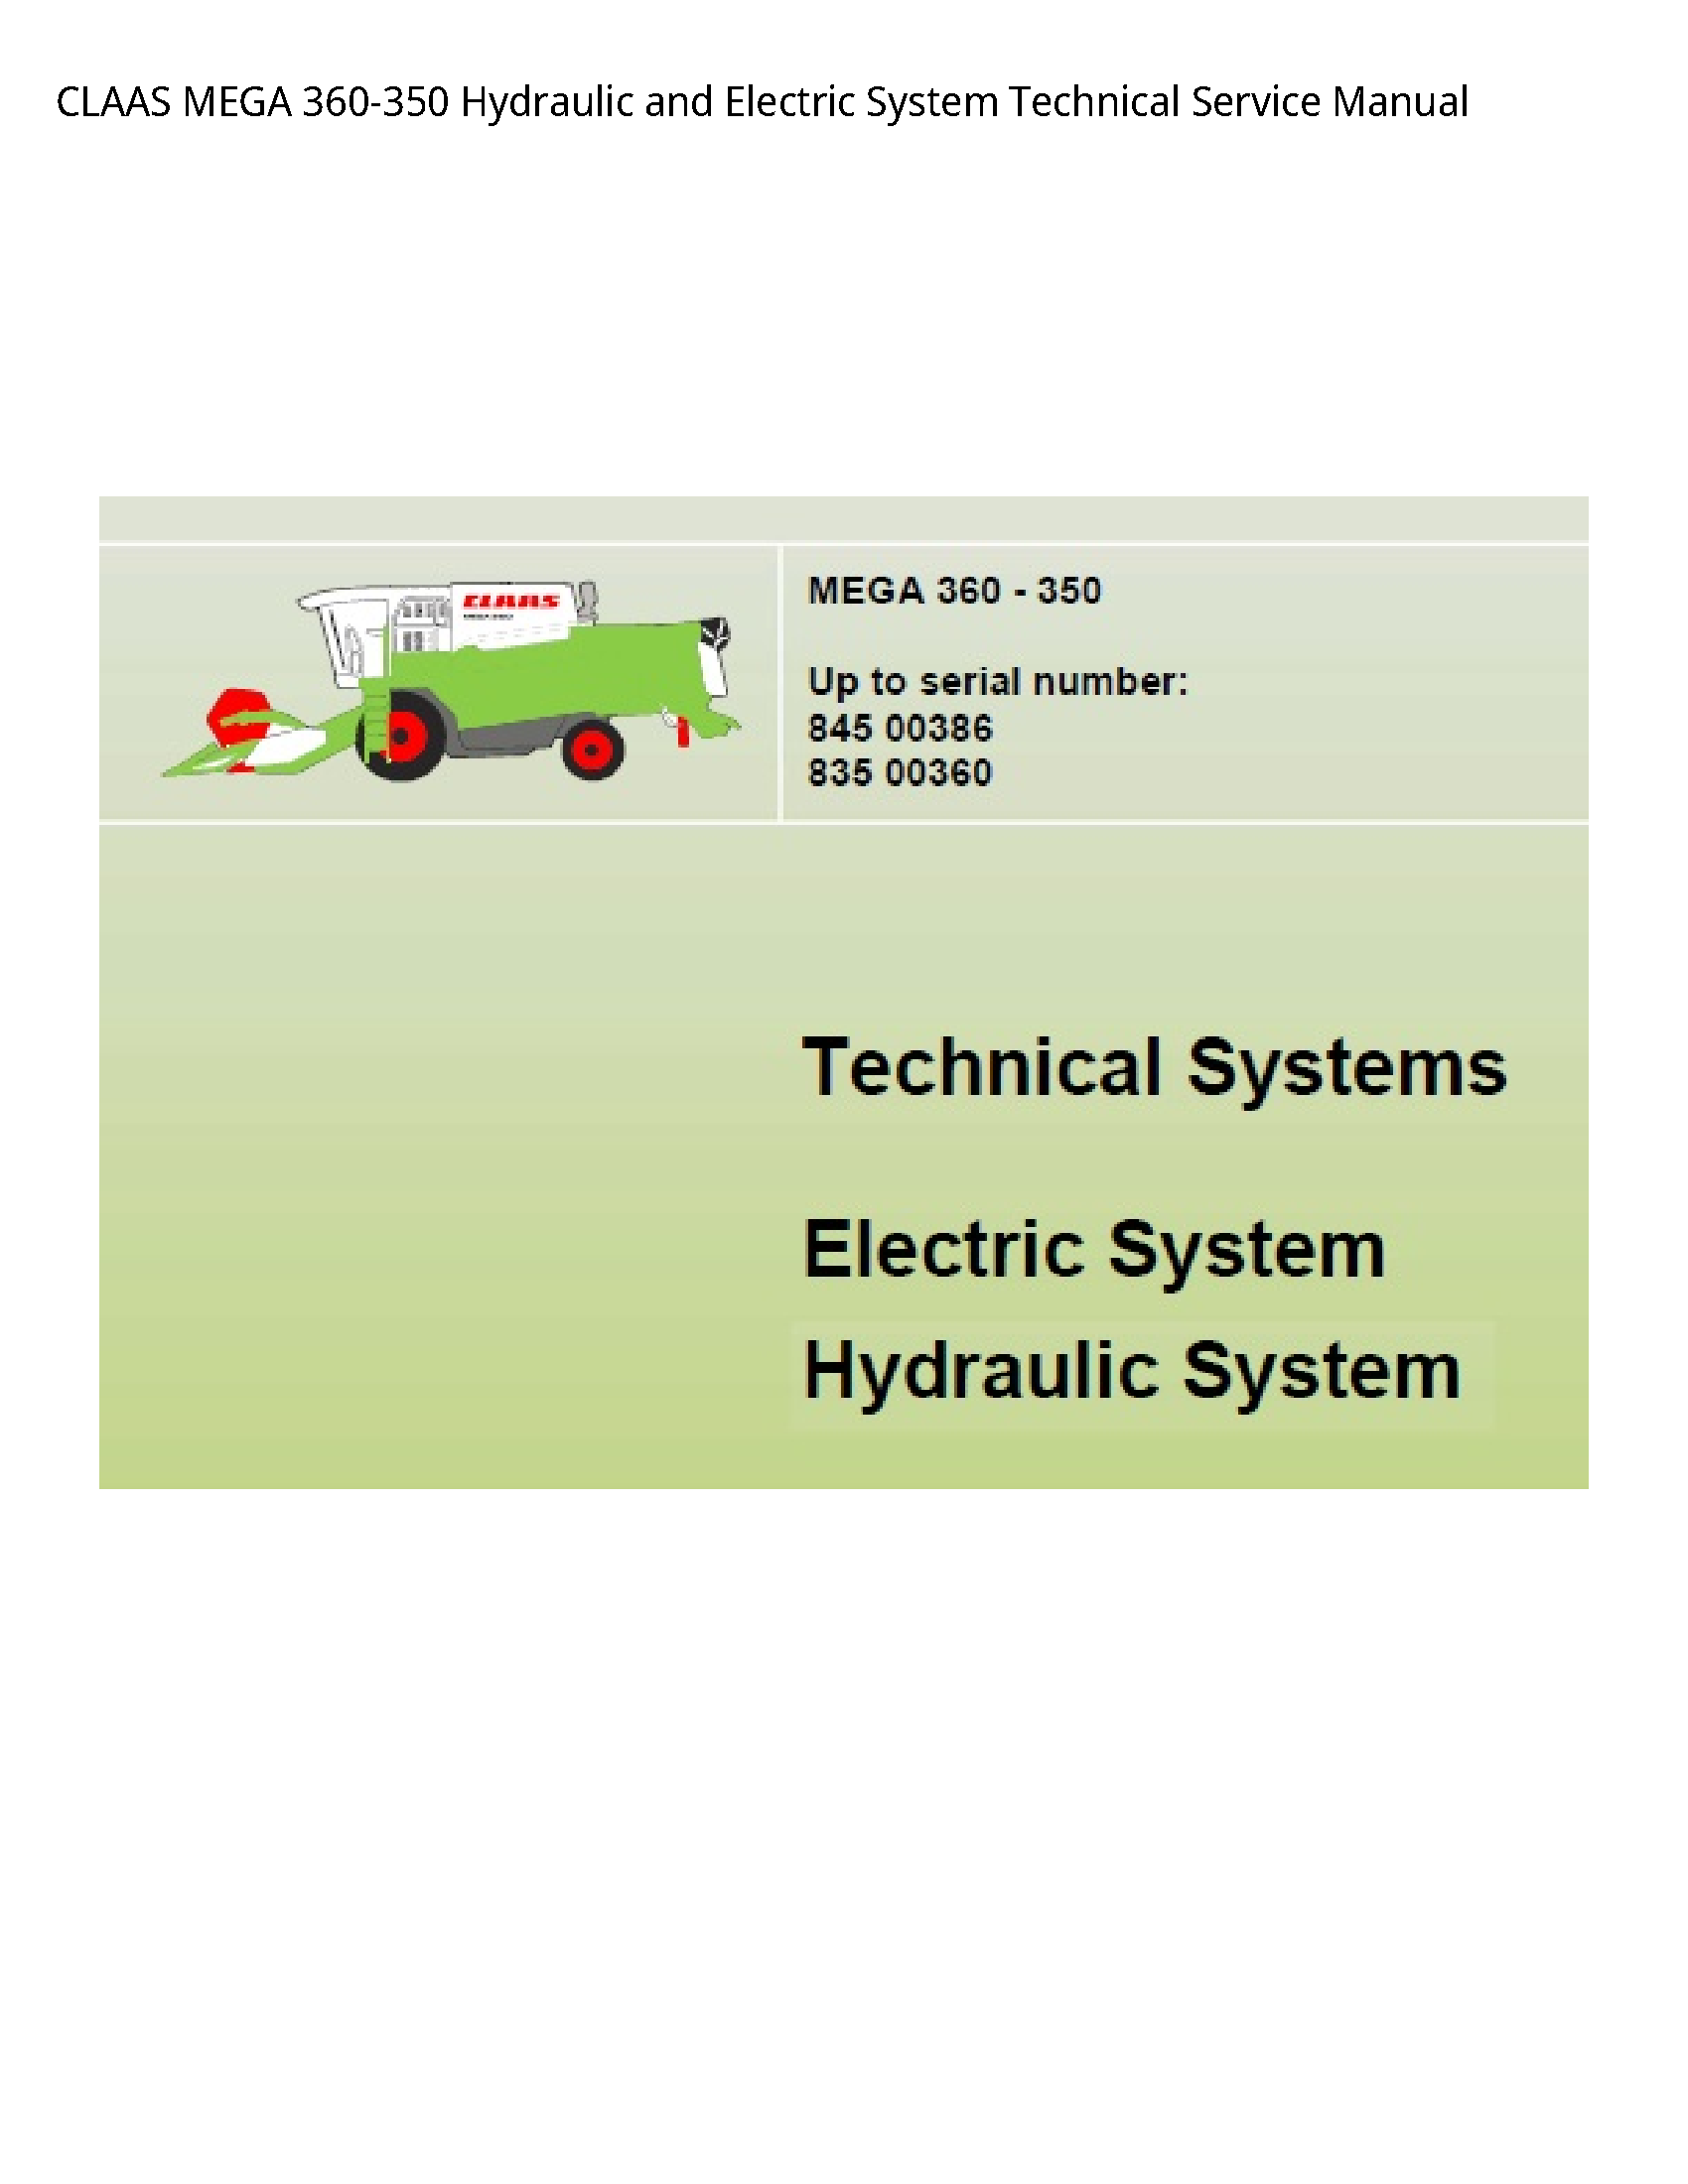 Claas 360-350 MEGA Hydraulic  Electric System Technical Service manual